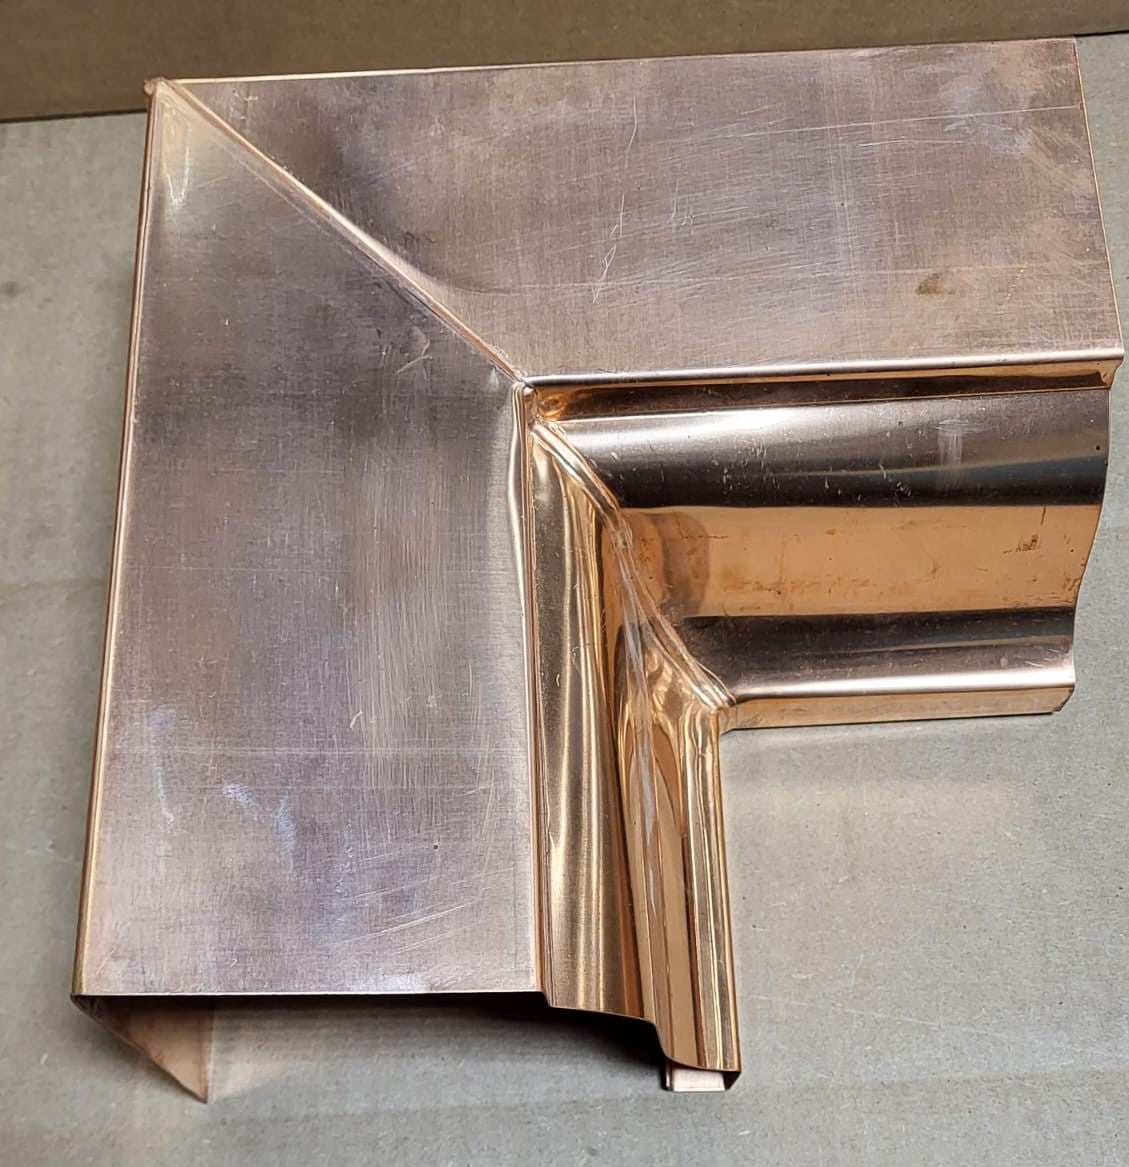 Copper Box Miter for K Style Gutters Available in 5" or 6"  Inside or Outside